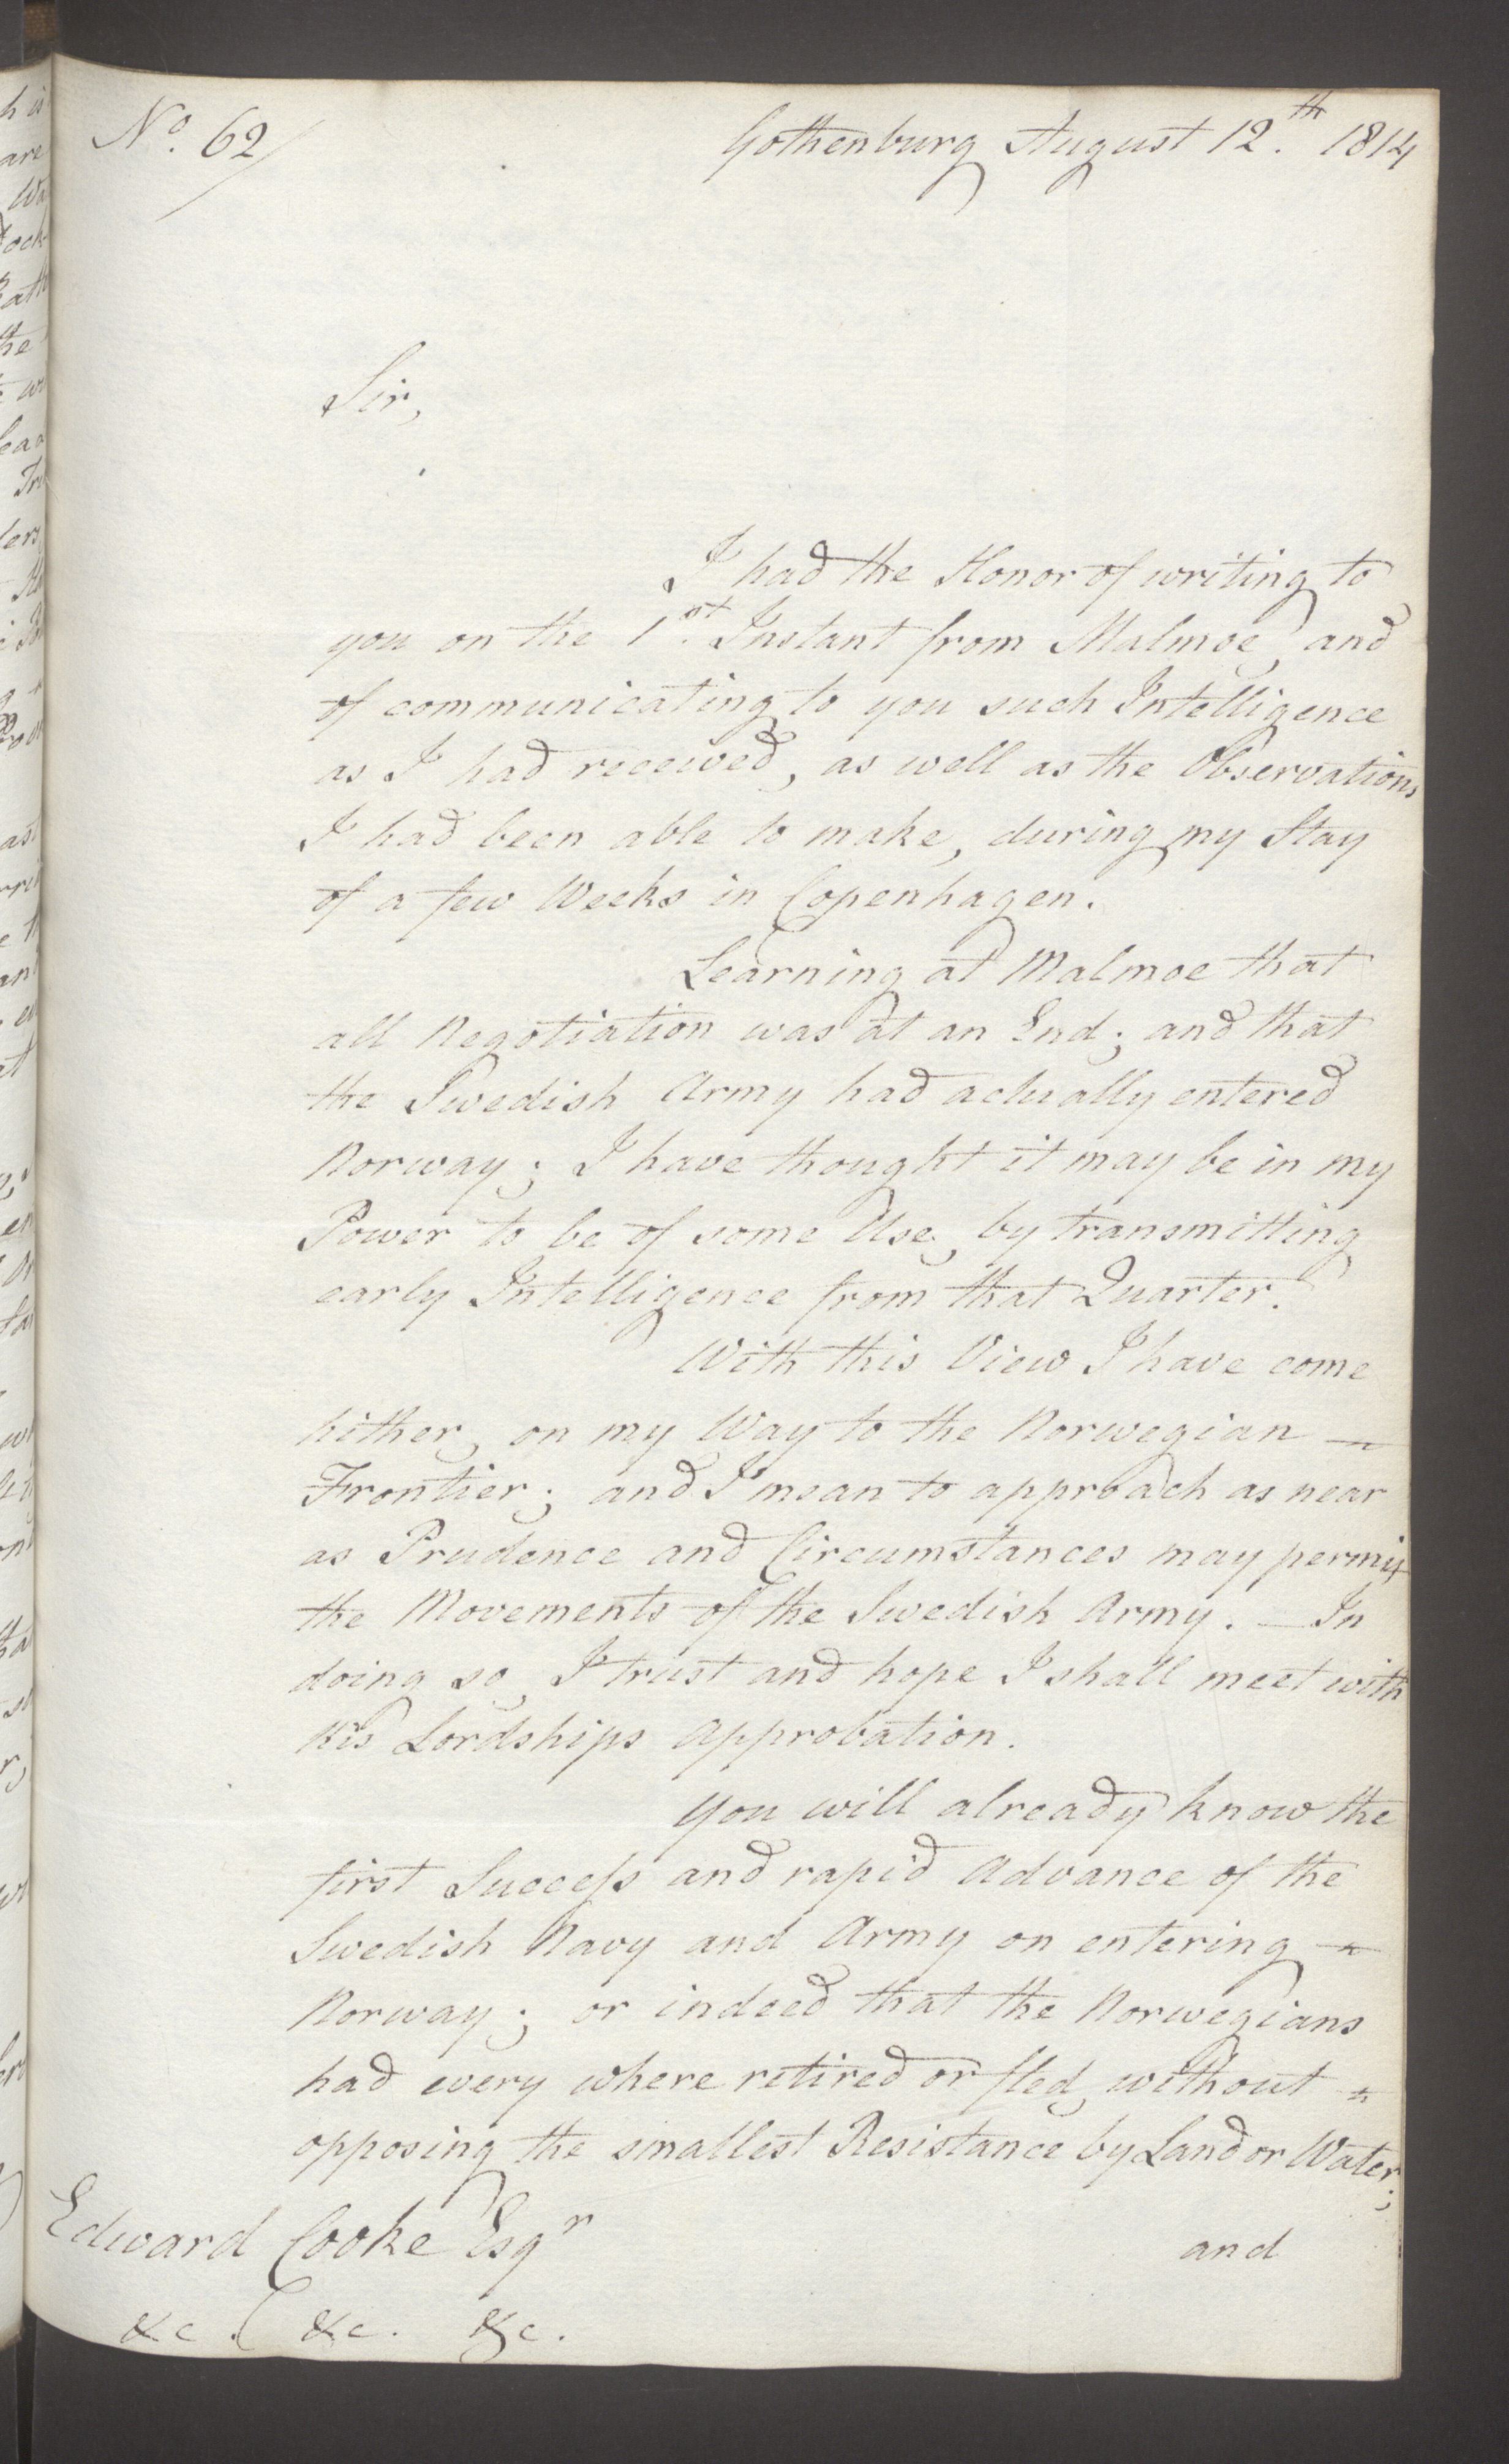 Foreign Office*, UKA/-/FO 38/16: Sir C. Gordon. Reports from Malmö, Jonkoping, and Helsingborg, 1814, s. 79